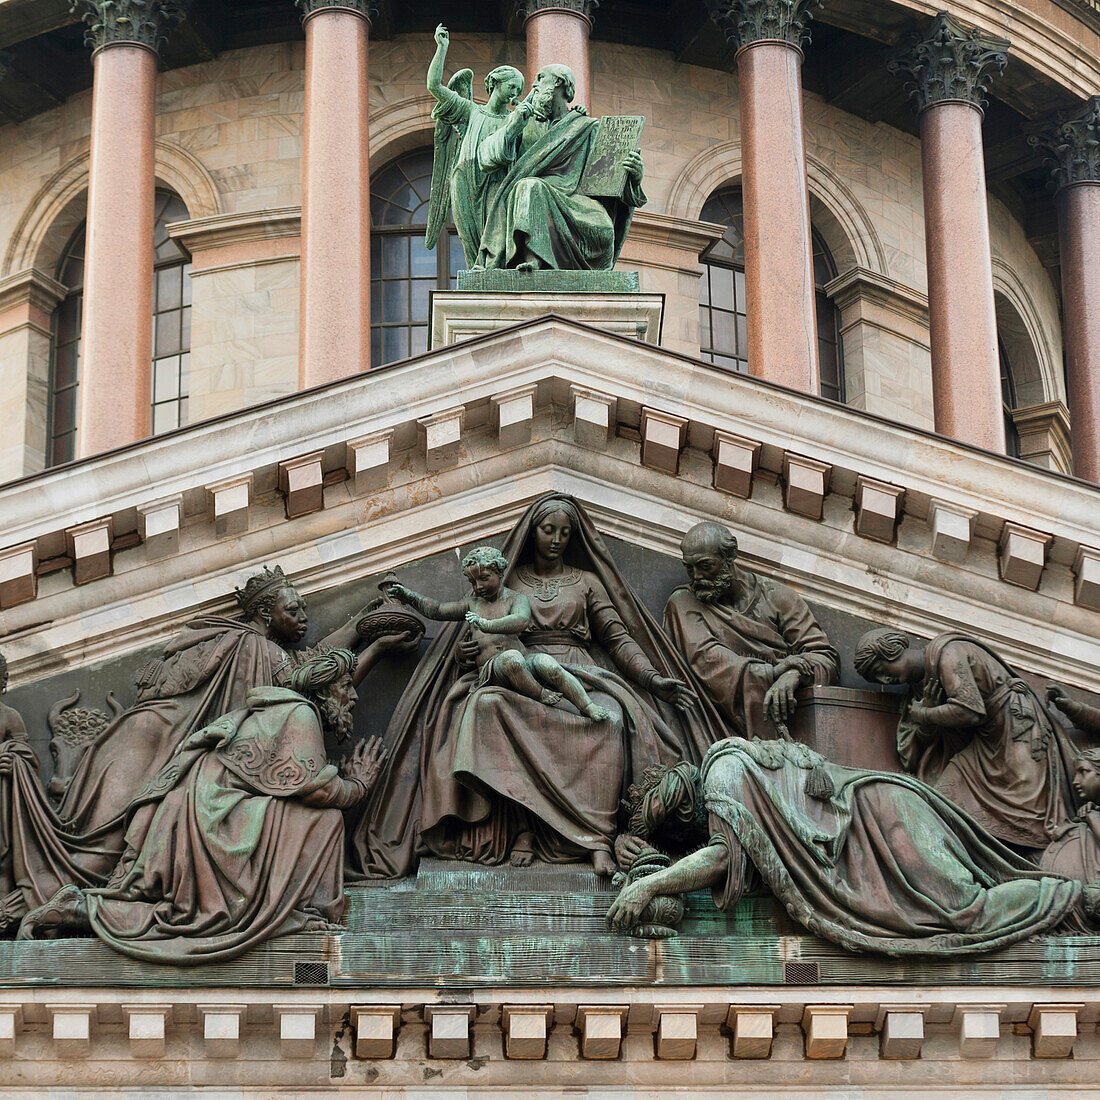 'Sculptures On Saint Isaac's Cathedral; St. Petersburg, Russia'